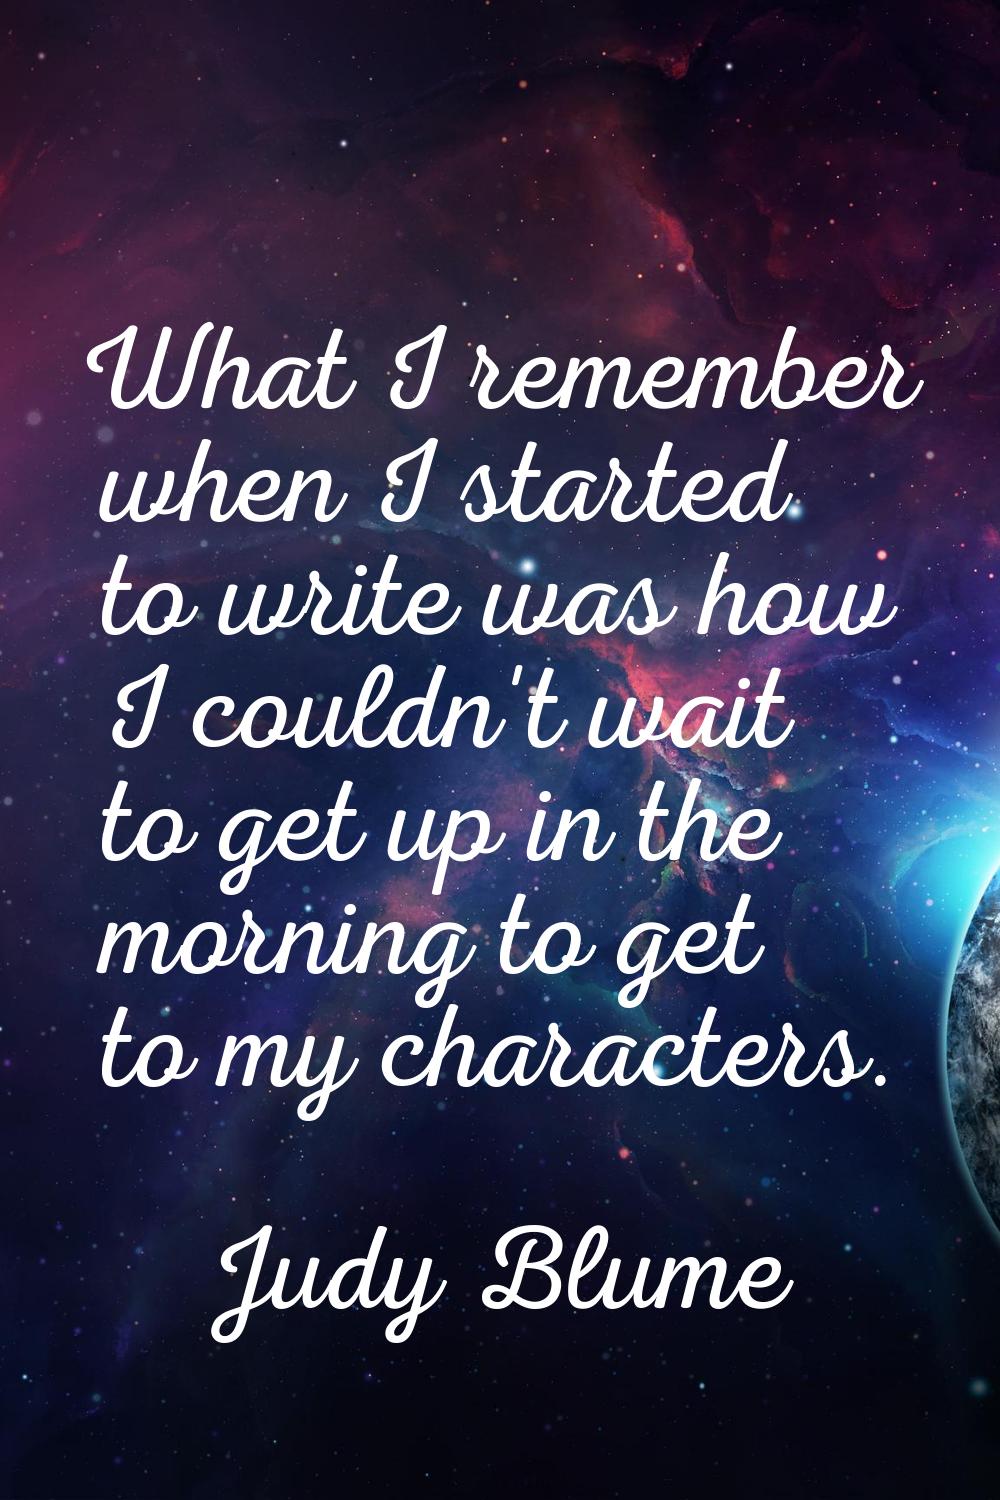 What I remember when I started to write was how I couldn't wait to get up in the morning to get to 